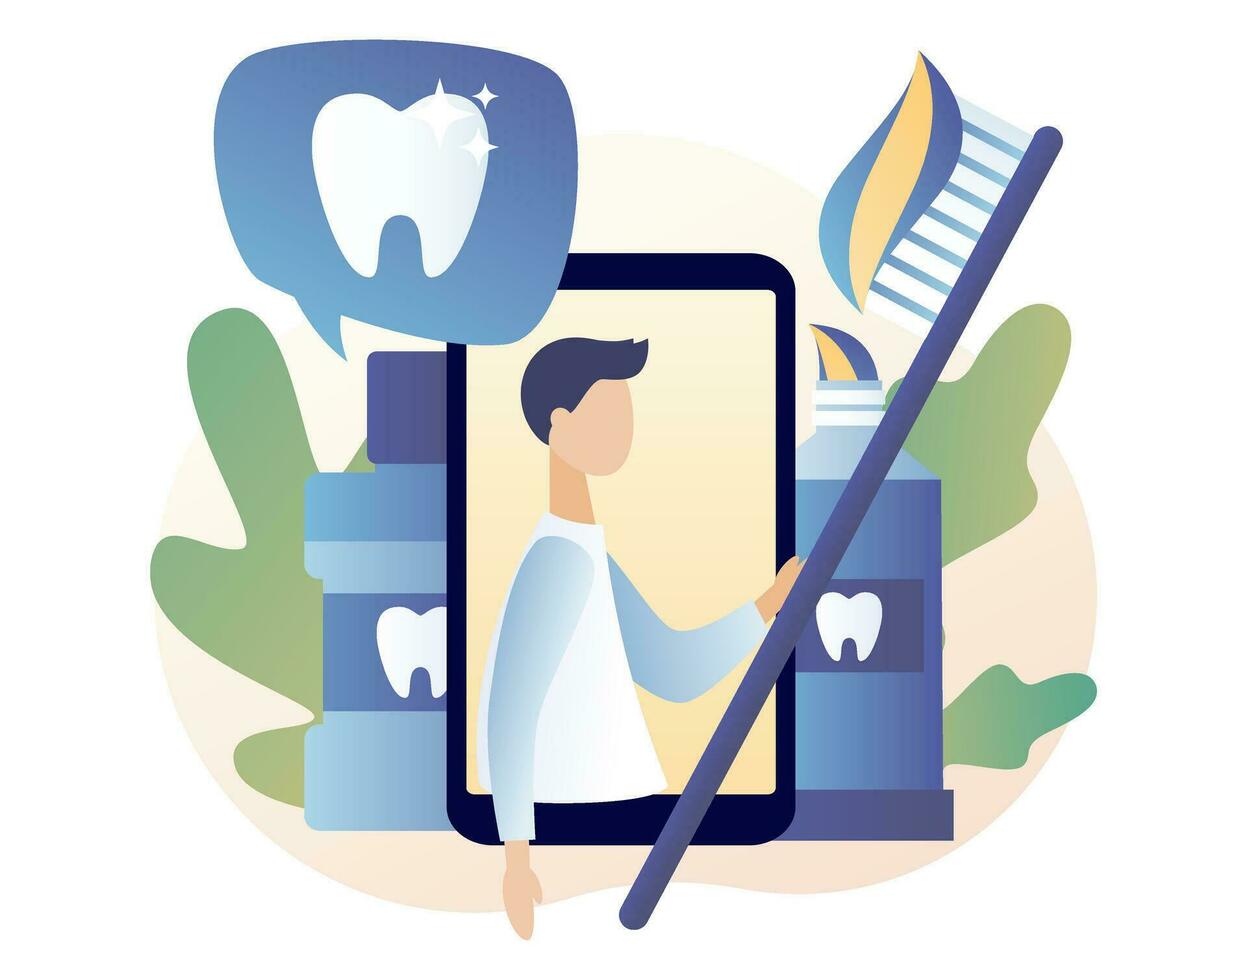 Dental clinic concept. Stomatology and orthodontics medical center. Dental care. Teeth treatment, protect and cleaning teeth. Modern flat cartoon style. Vector illustration